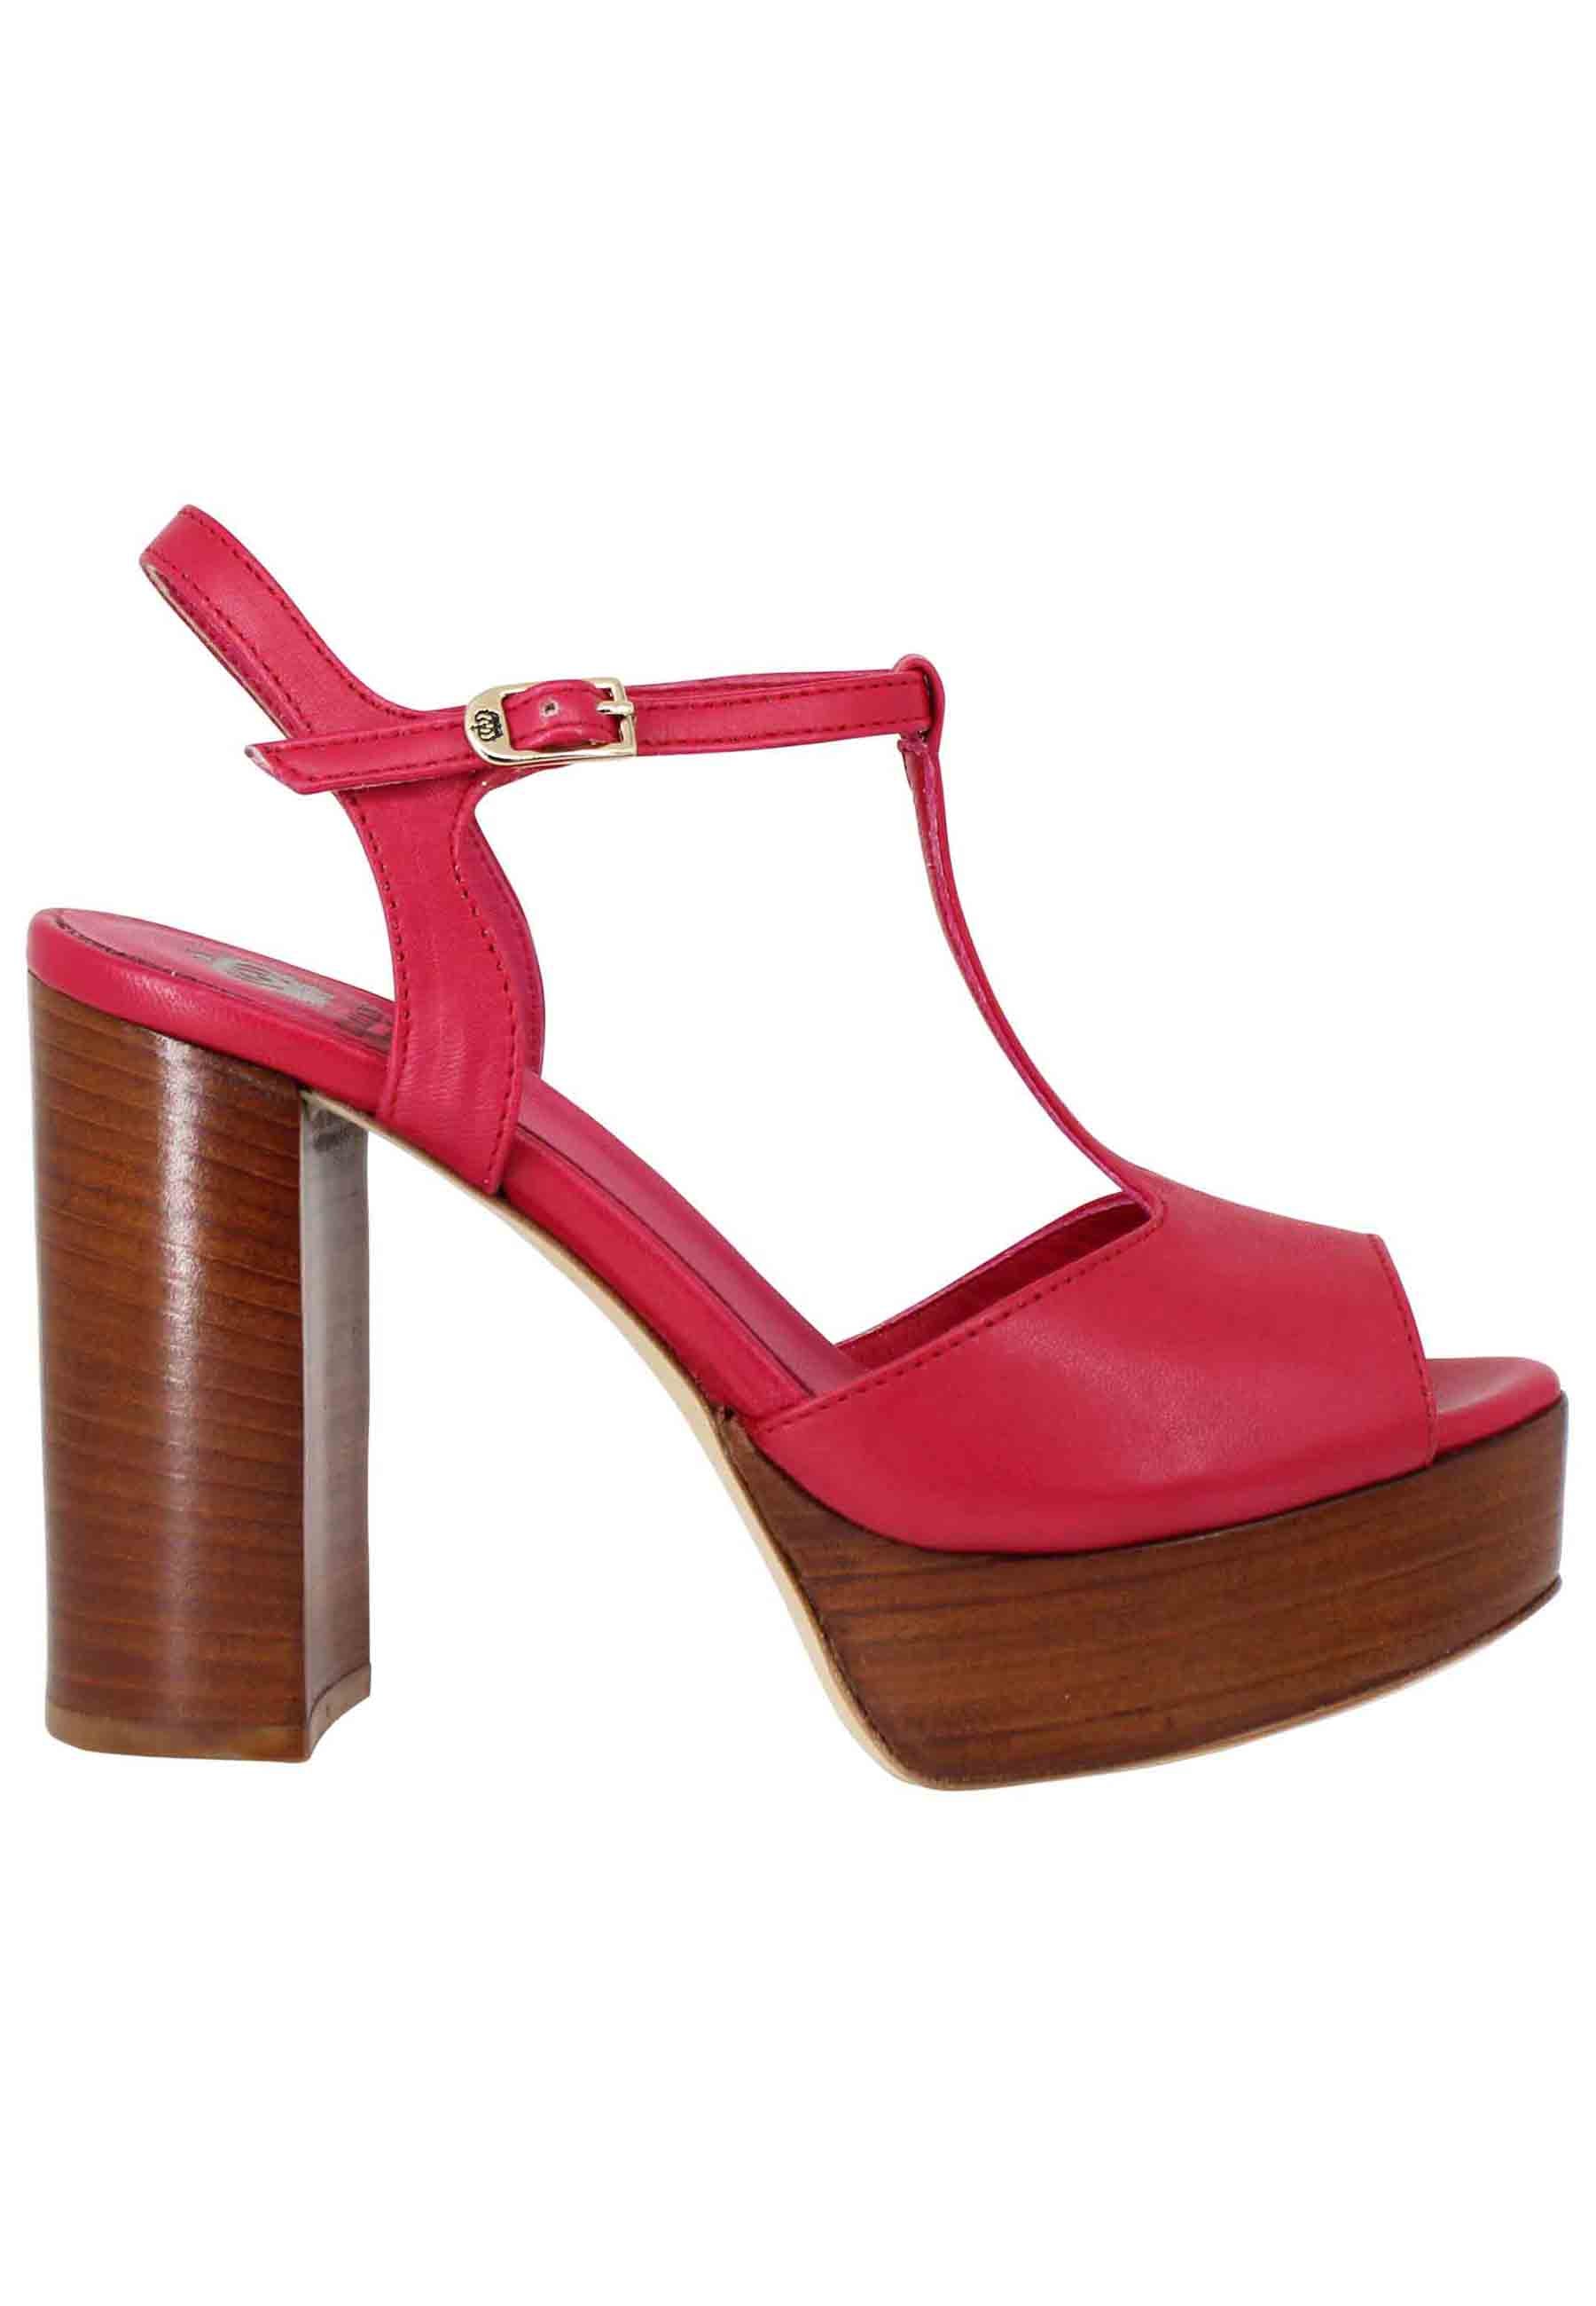 Women's red leather sandals with high heel strap and platform